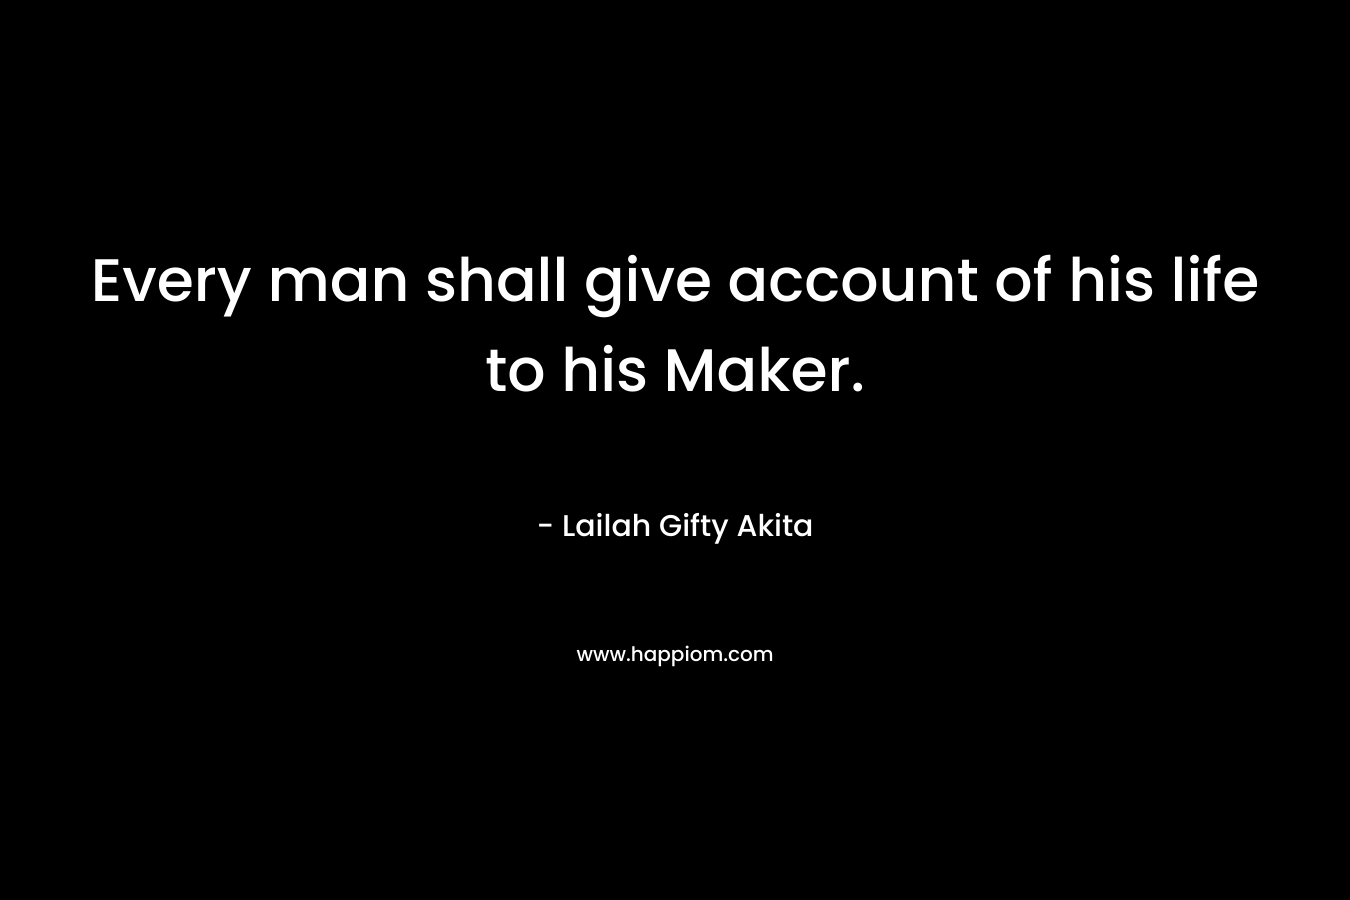 Every man shall give account of his life to his Maker.